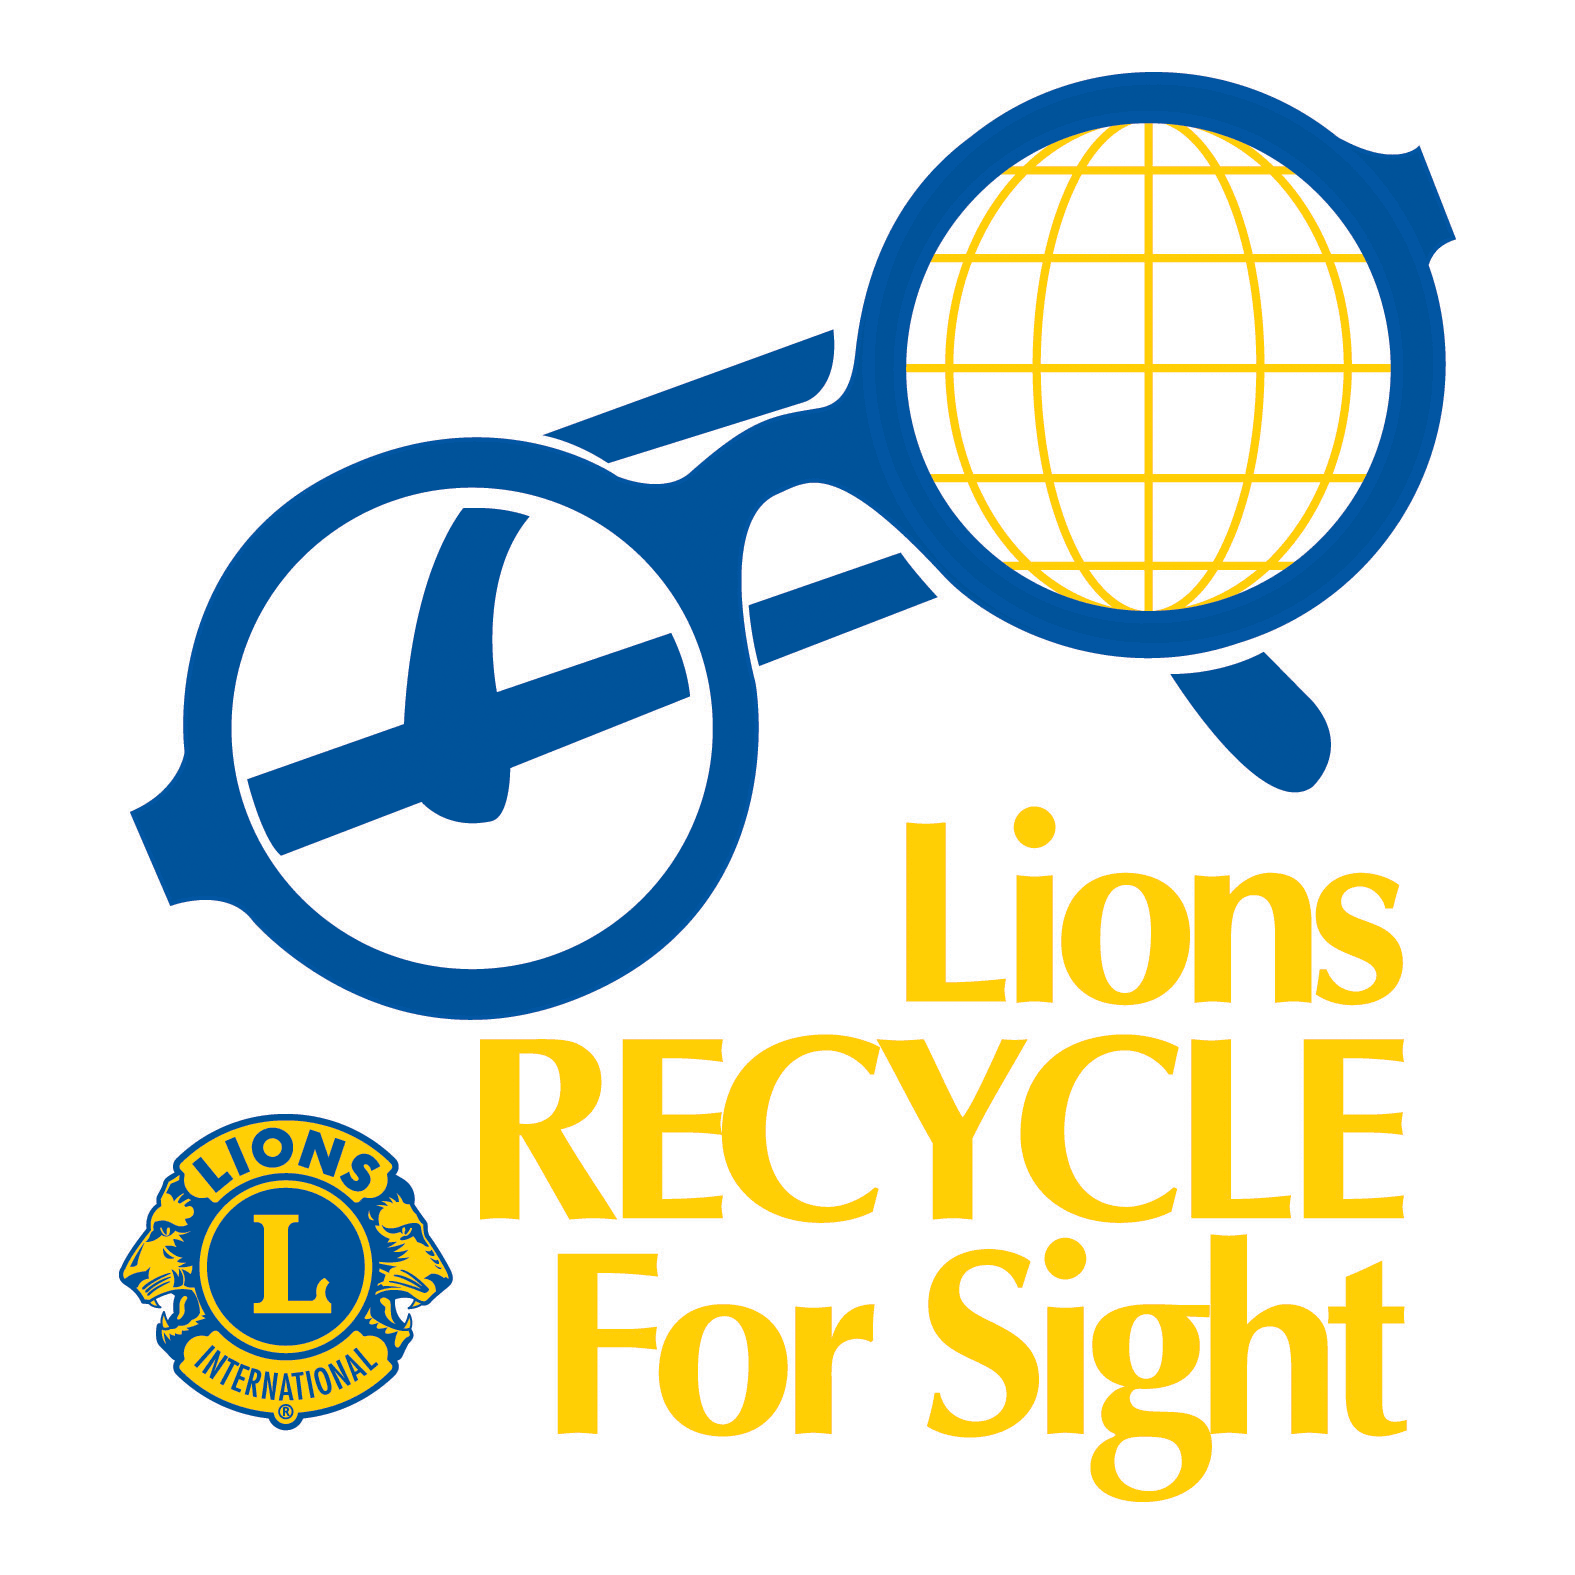 Lions Recycle glasses